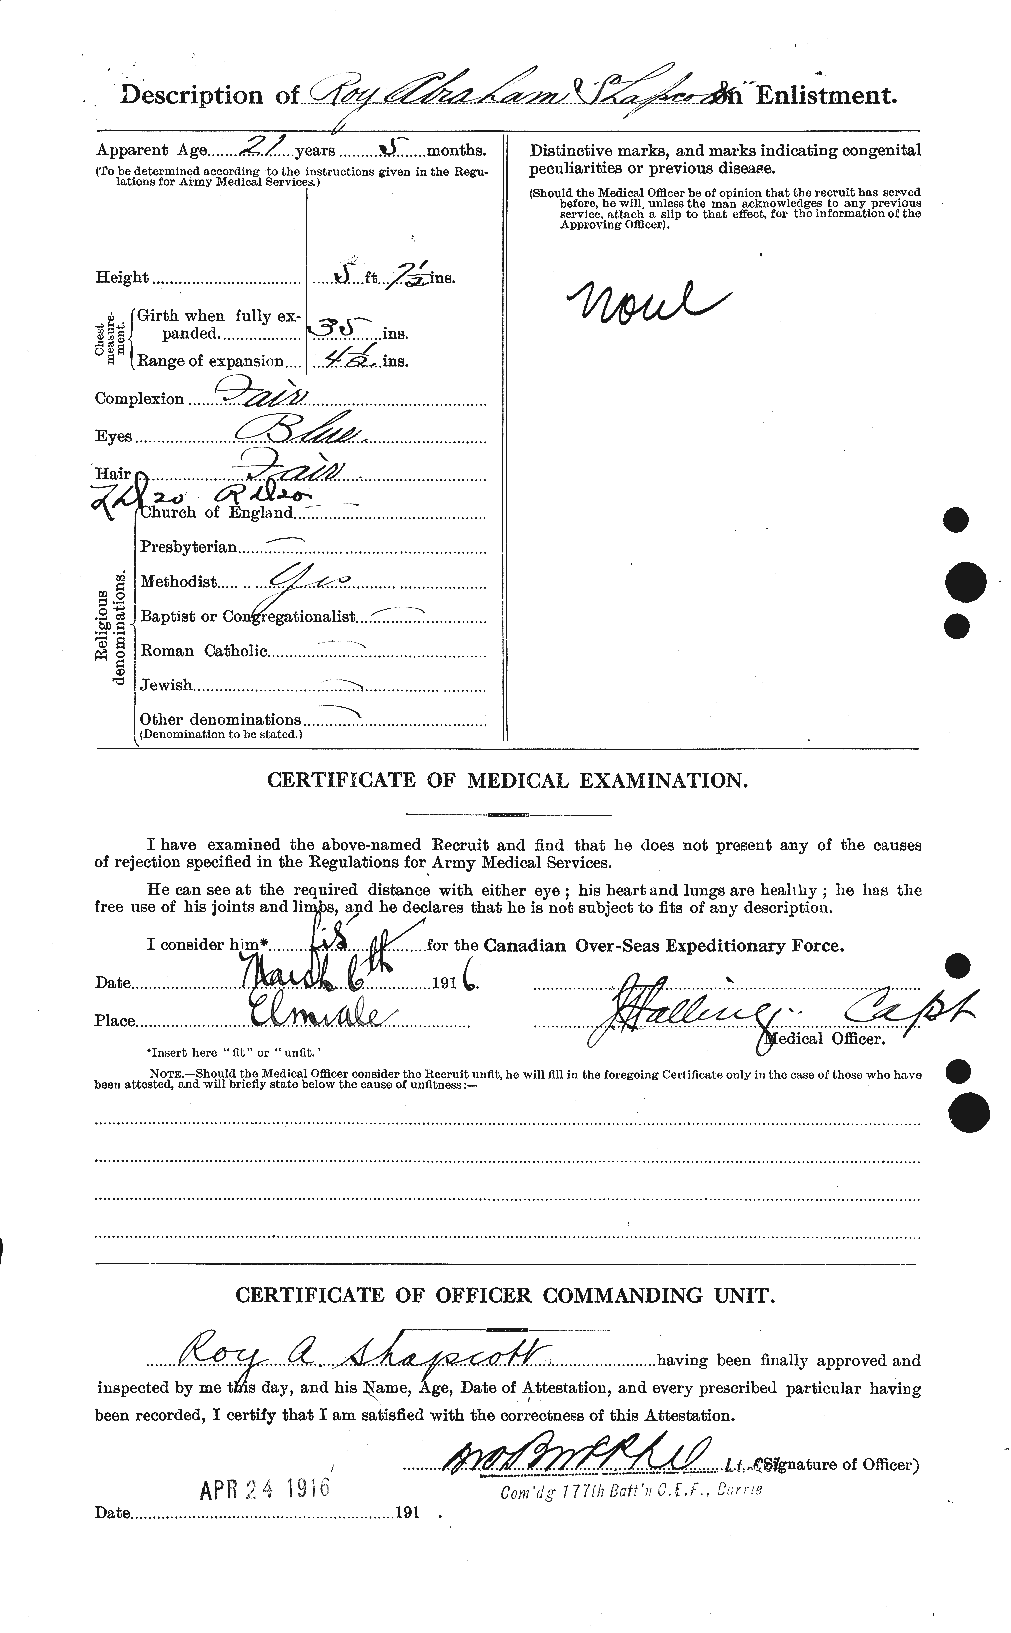 Personnel Records of the First World War - CEF 088083b